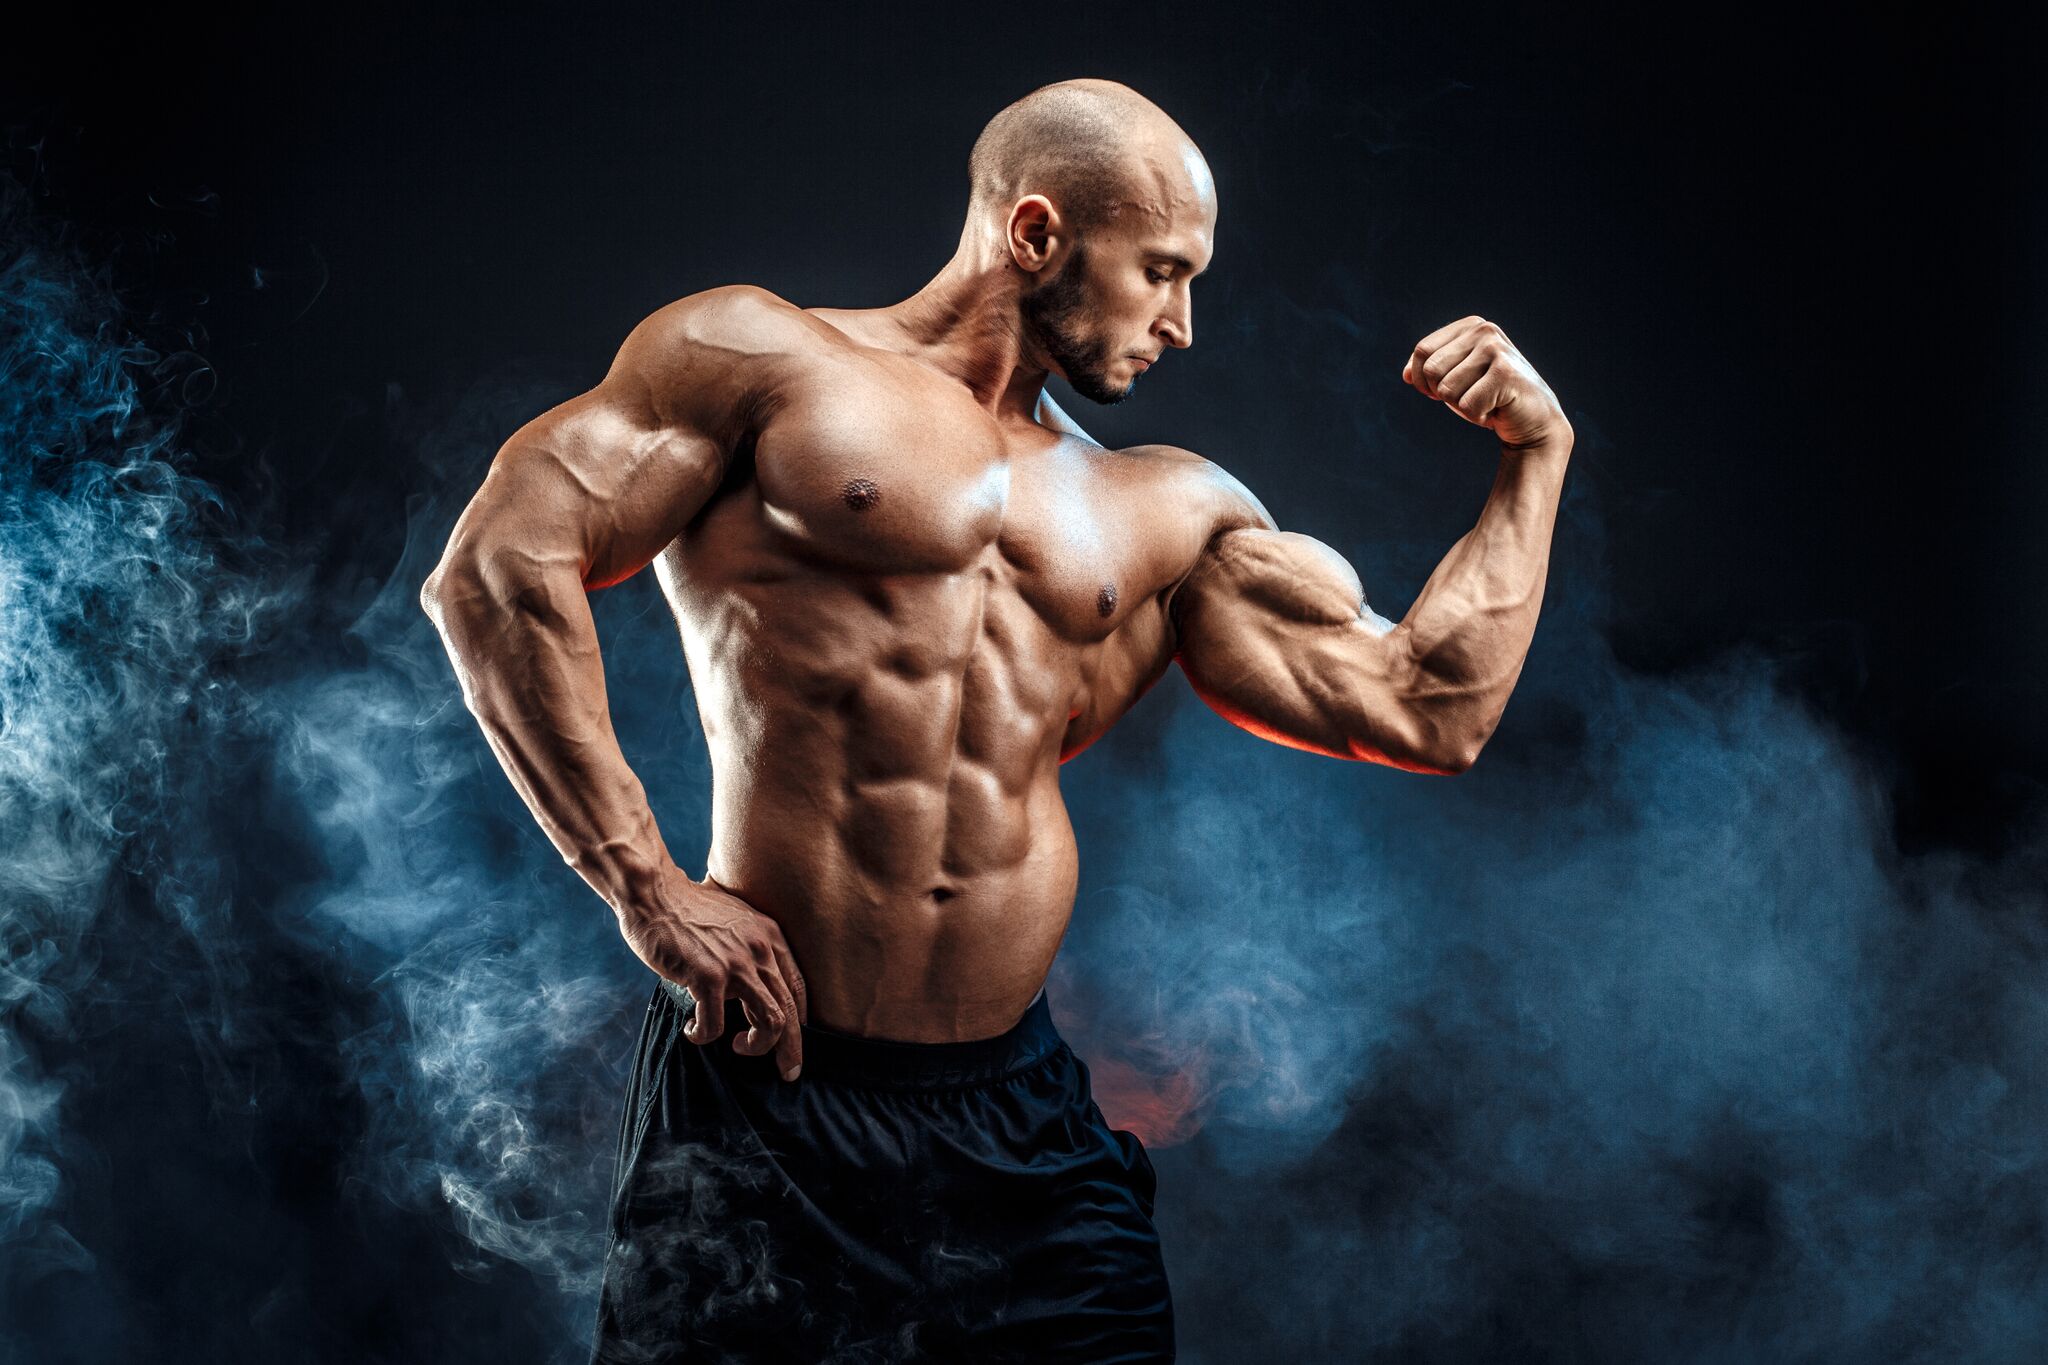 Does steroids vs hgh Sometimes Make You Feel Stupid?